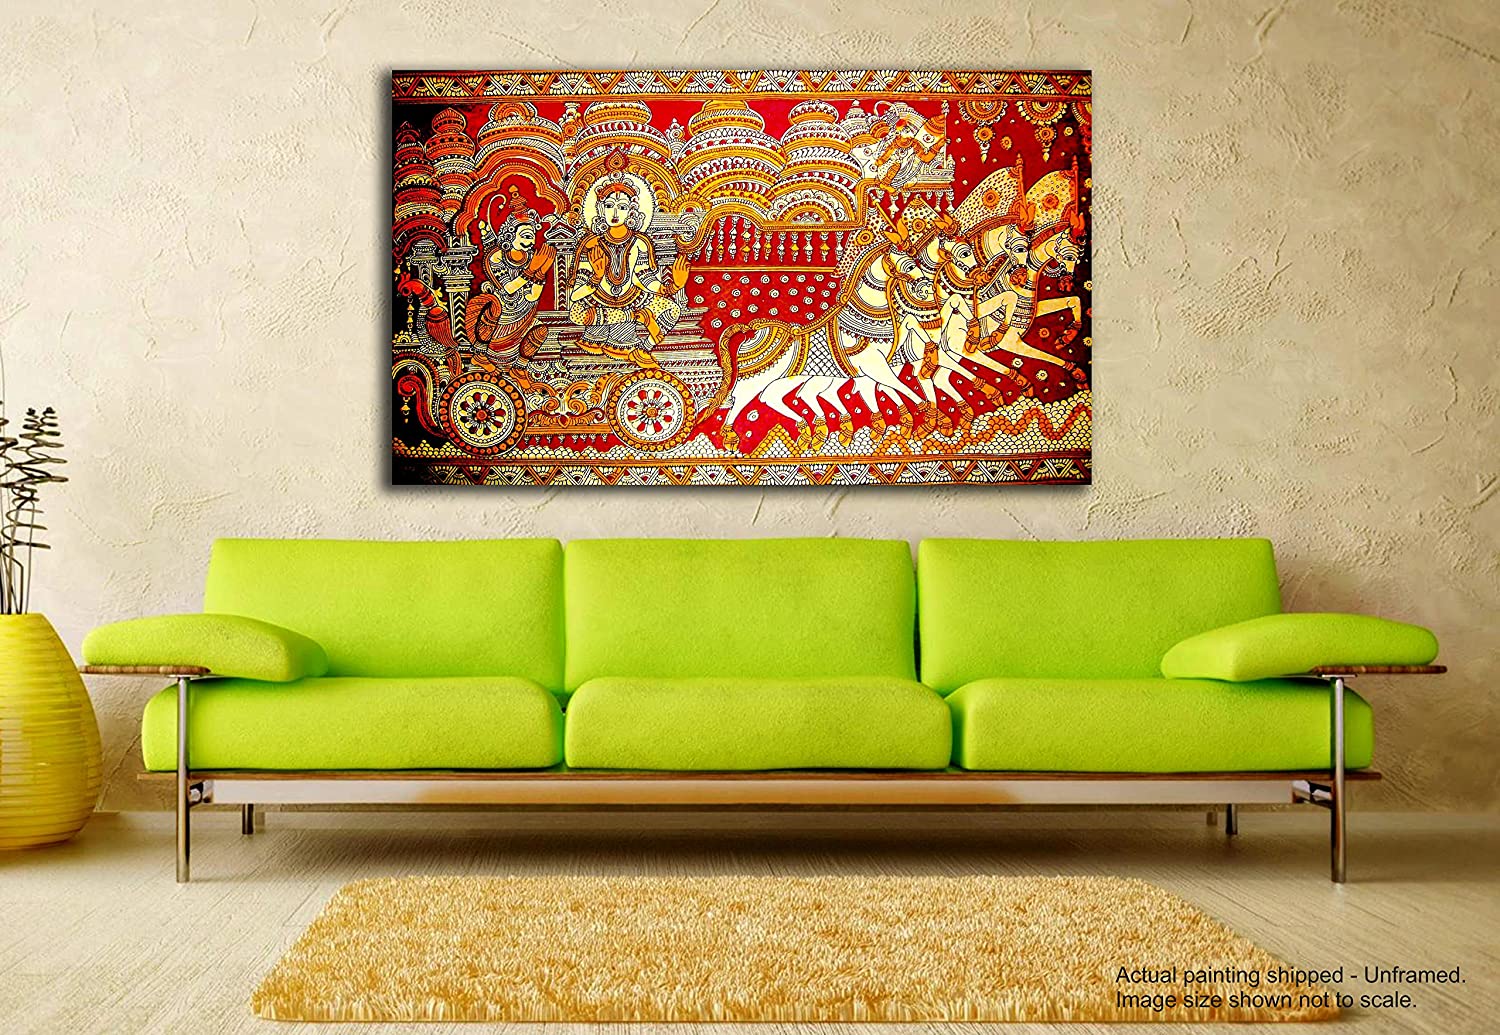 Madhubani Art Canvas Painting of KrishnaArjun on Chariot | Traditional Art Unframed Painting for Home (Made to Order)